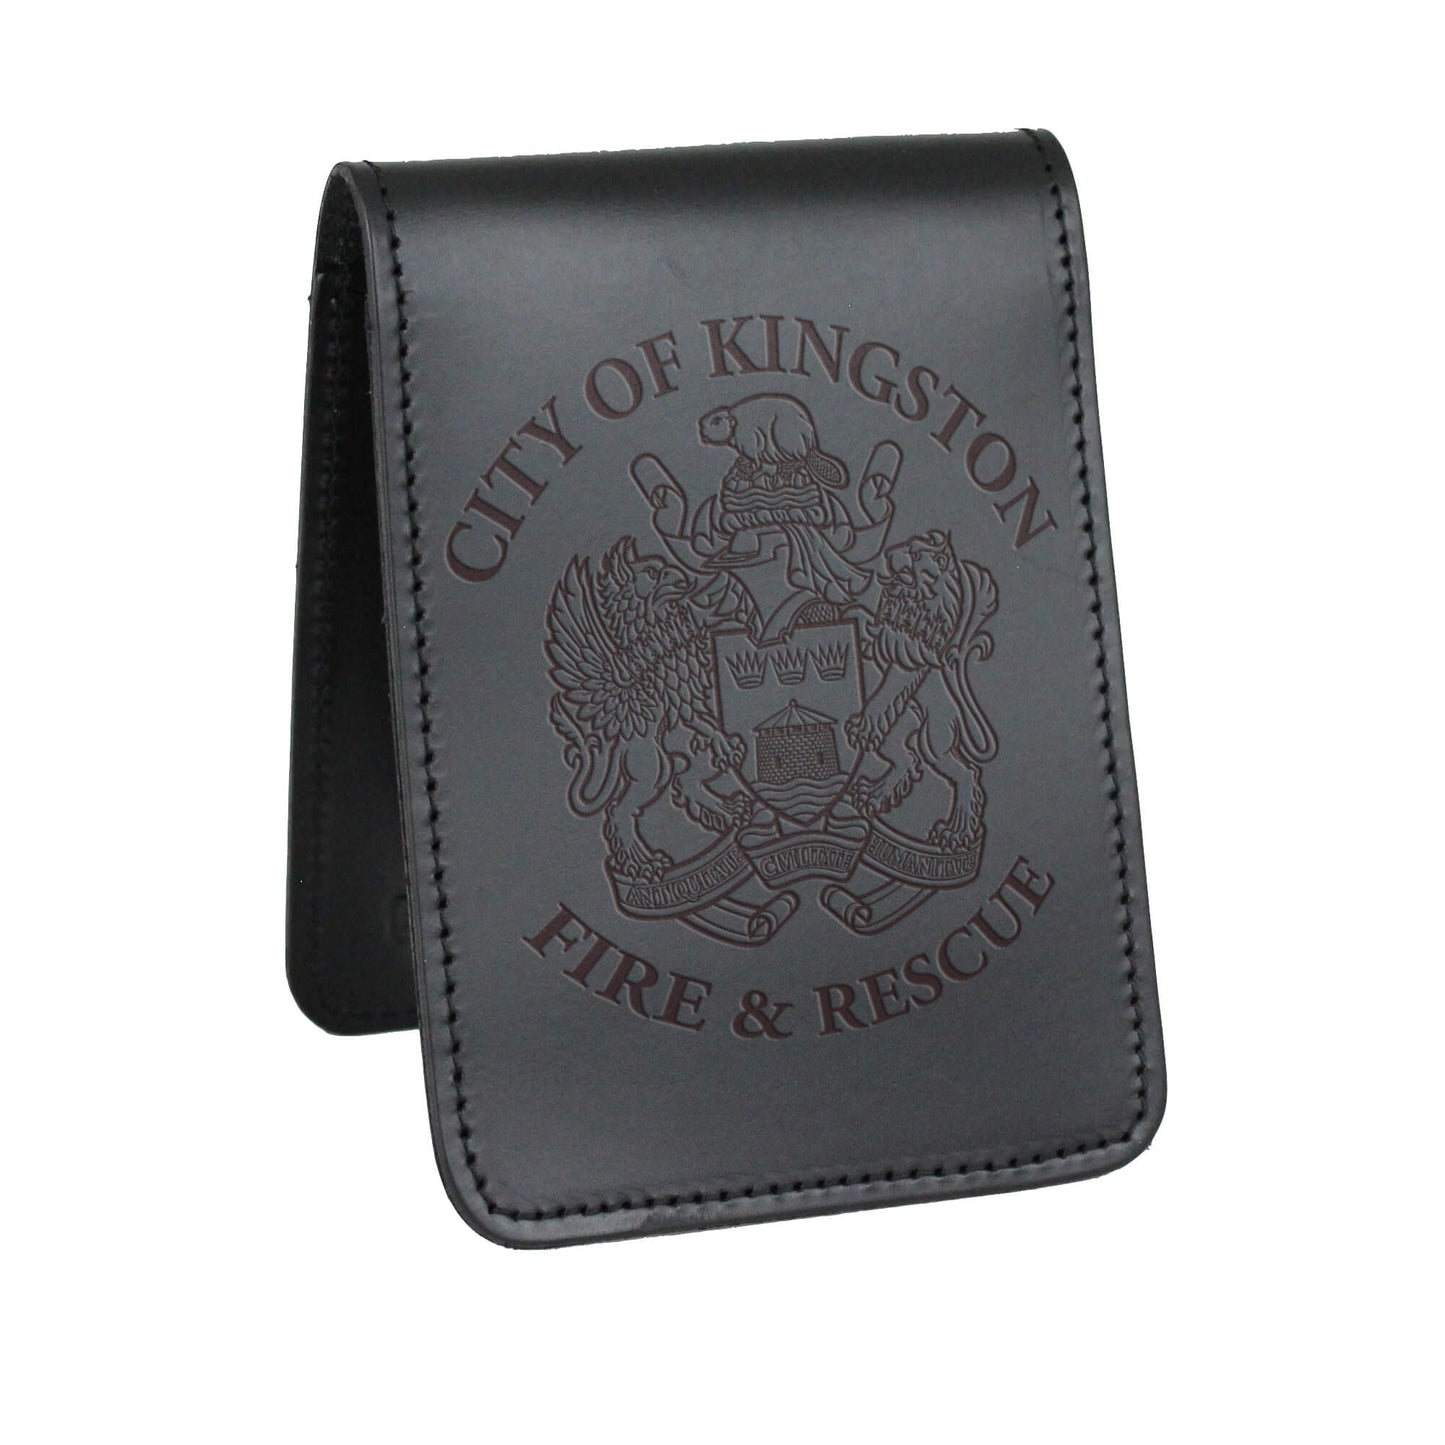 Kingston Fire & Rescue Notebook Cover